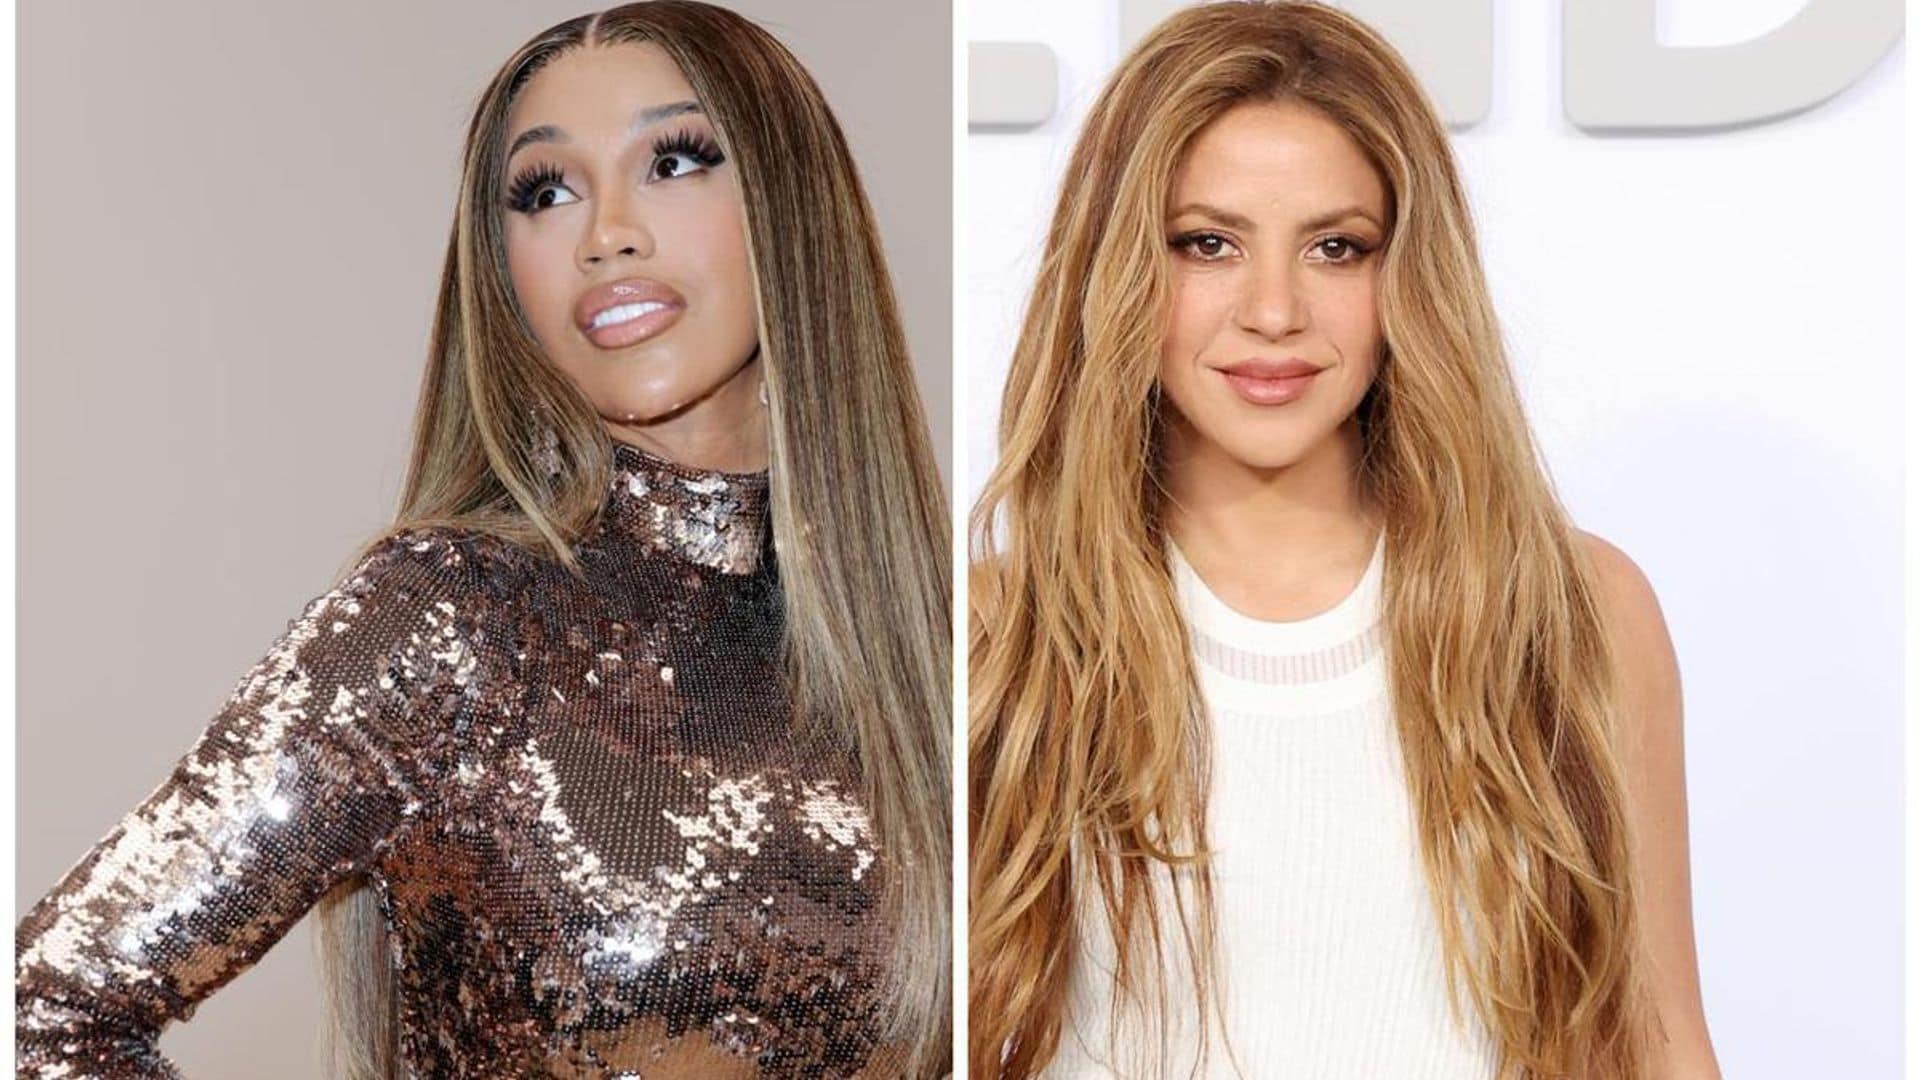 Cardi B praises Shakira and sings her songs after meeting her in Paris: ‘Life is so crazy’